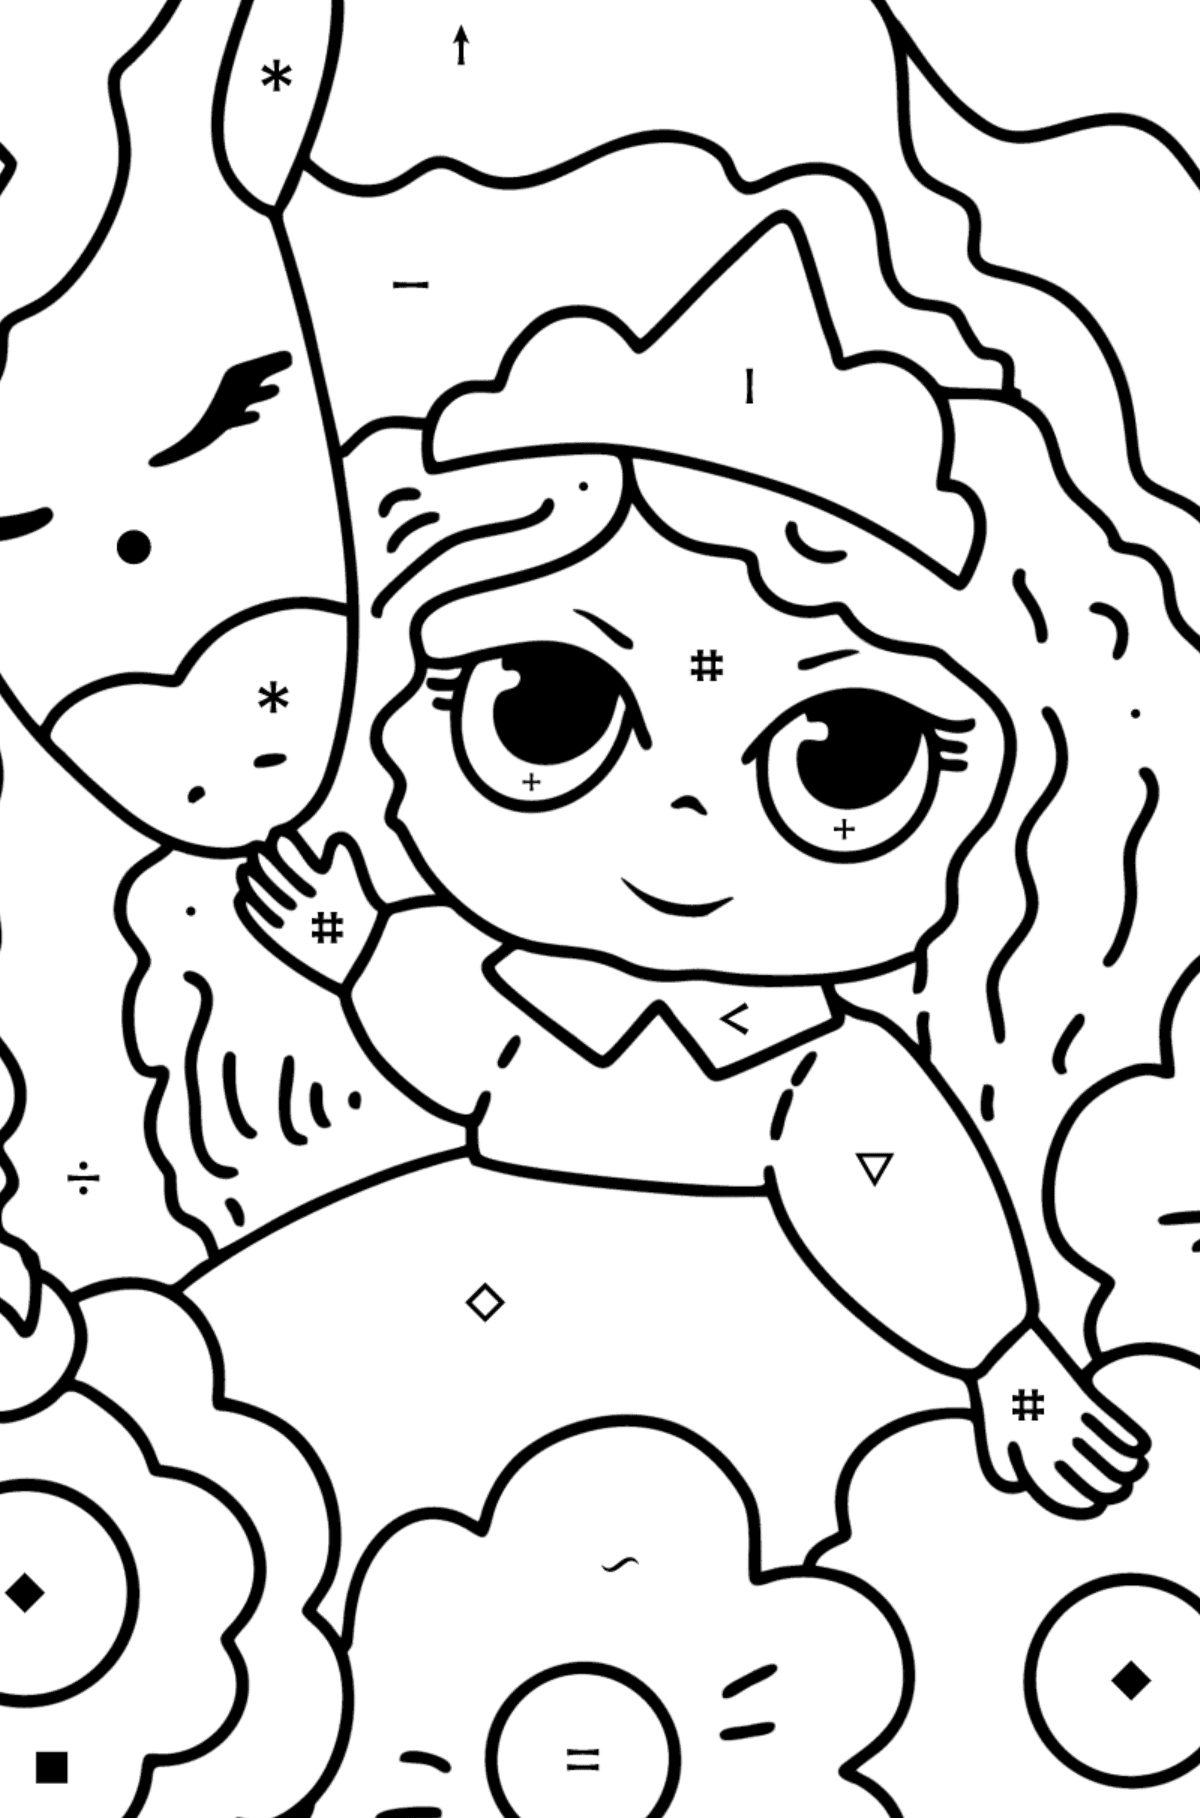 Magical unicorn and princess coloring page - Coloring by Symbols for Kids